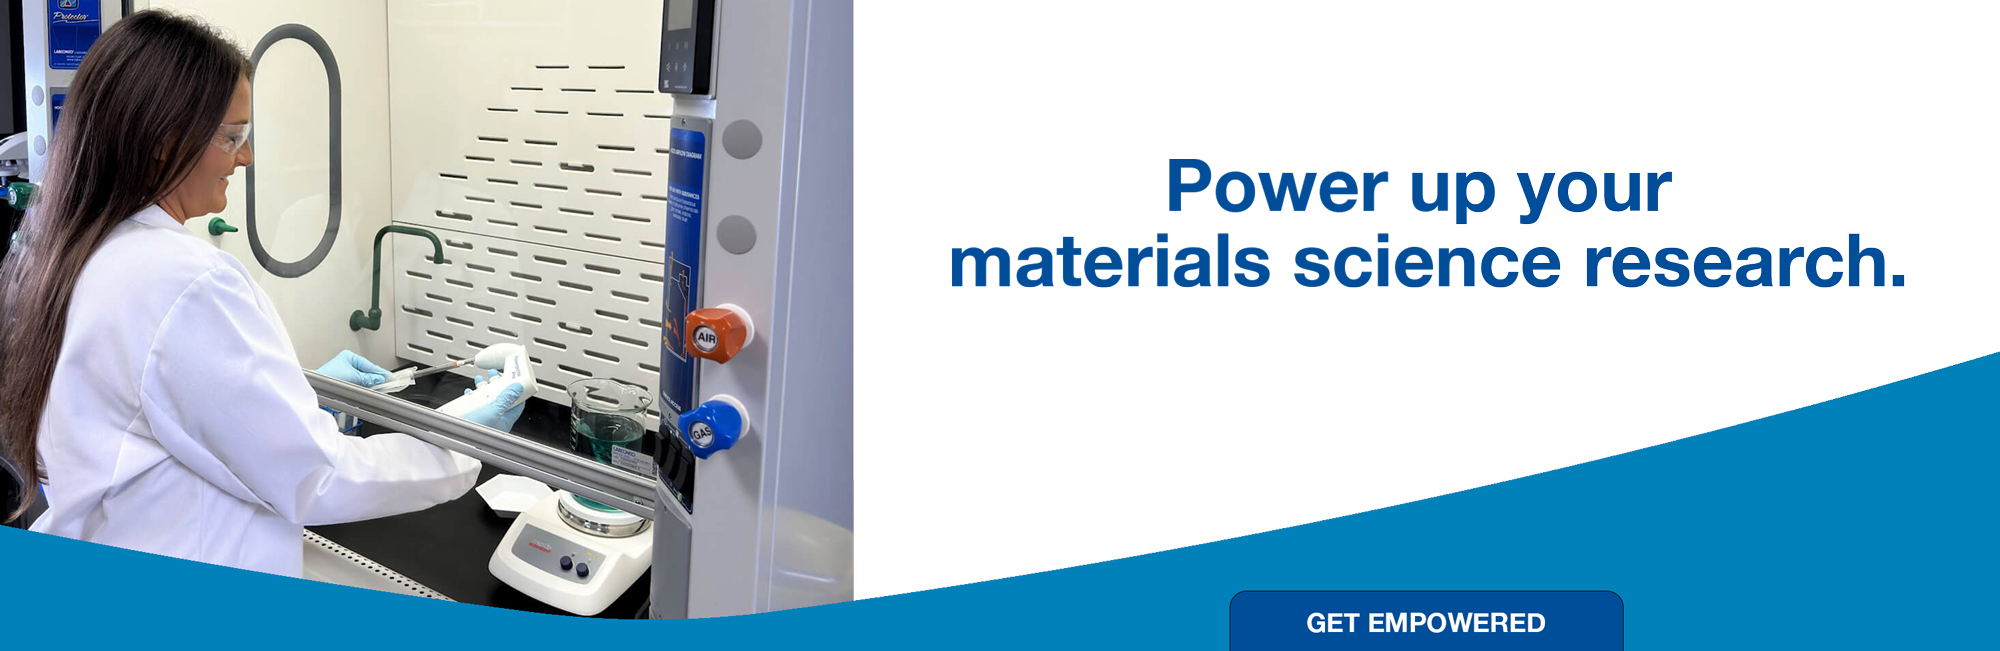 Power up your materials science research.